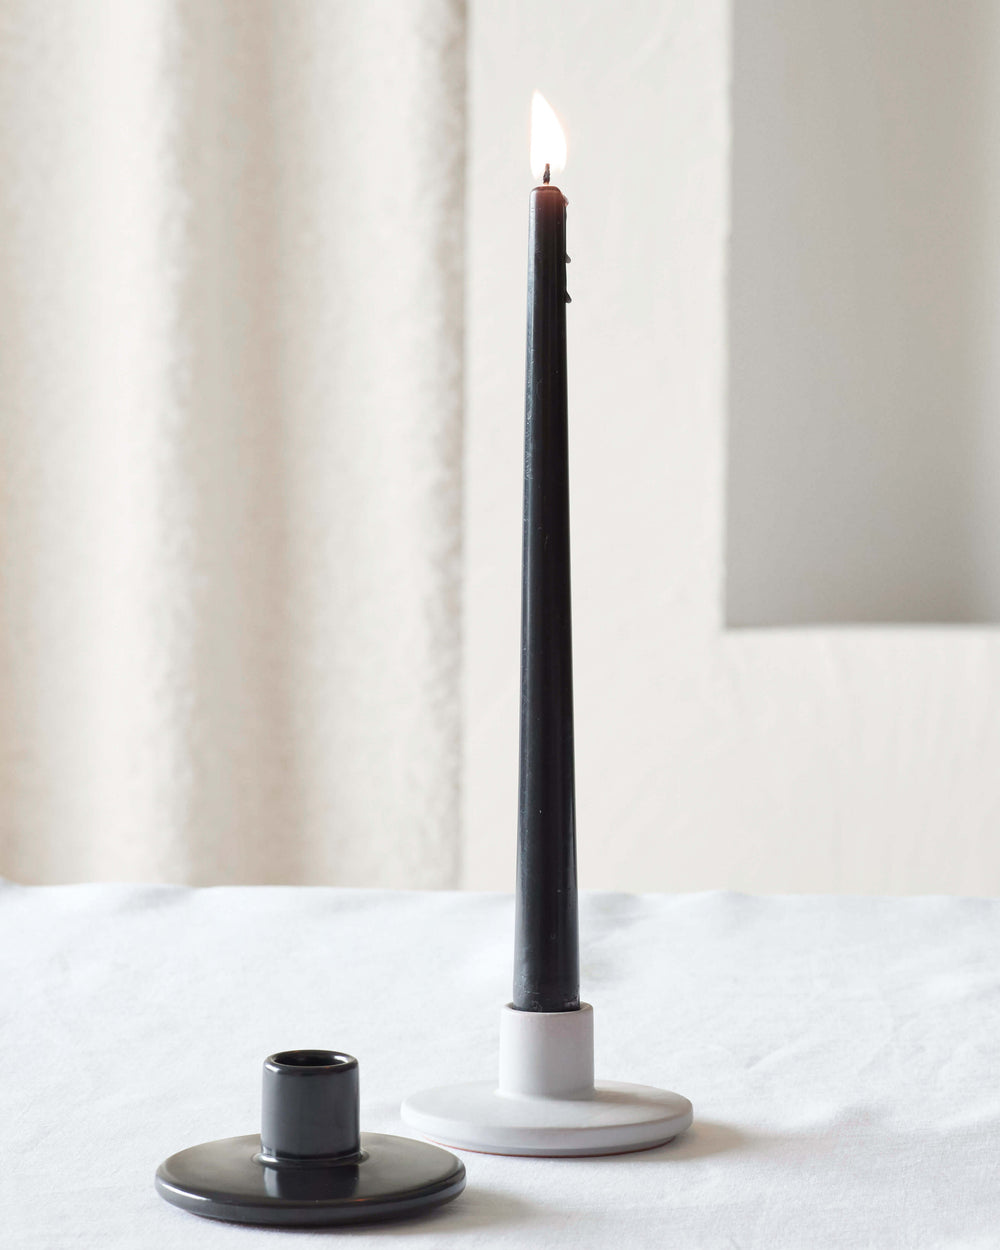 Safia ceramic taper holders by Fairkind in light gray and black on white table.